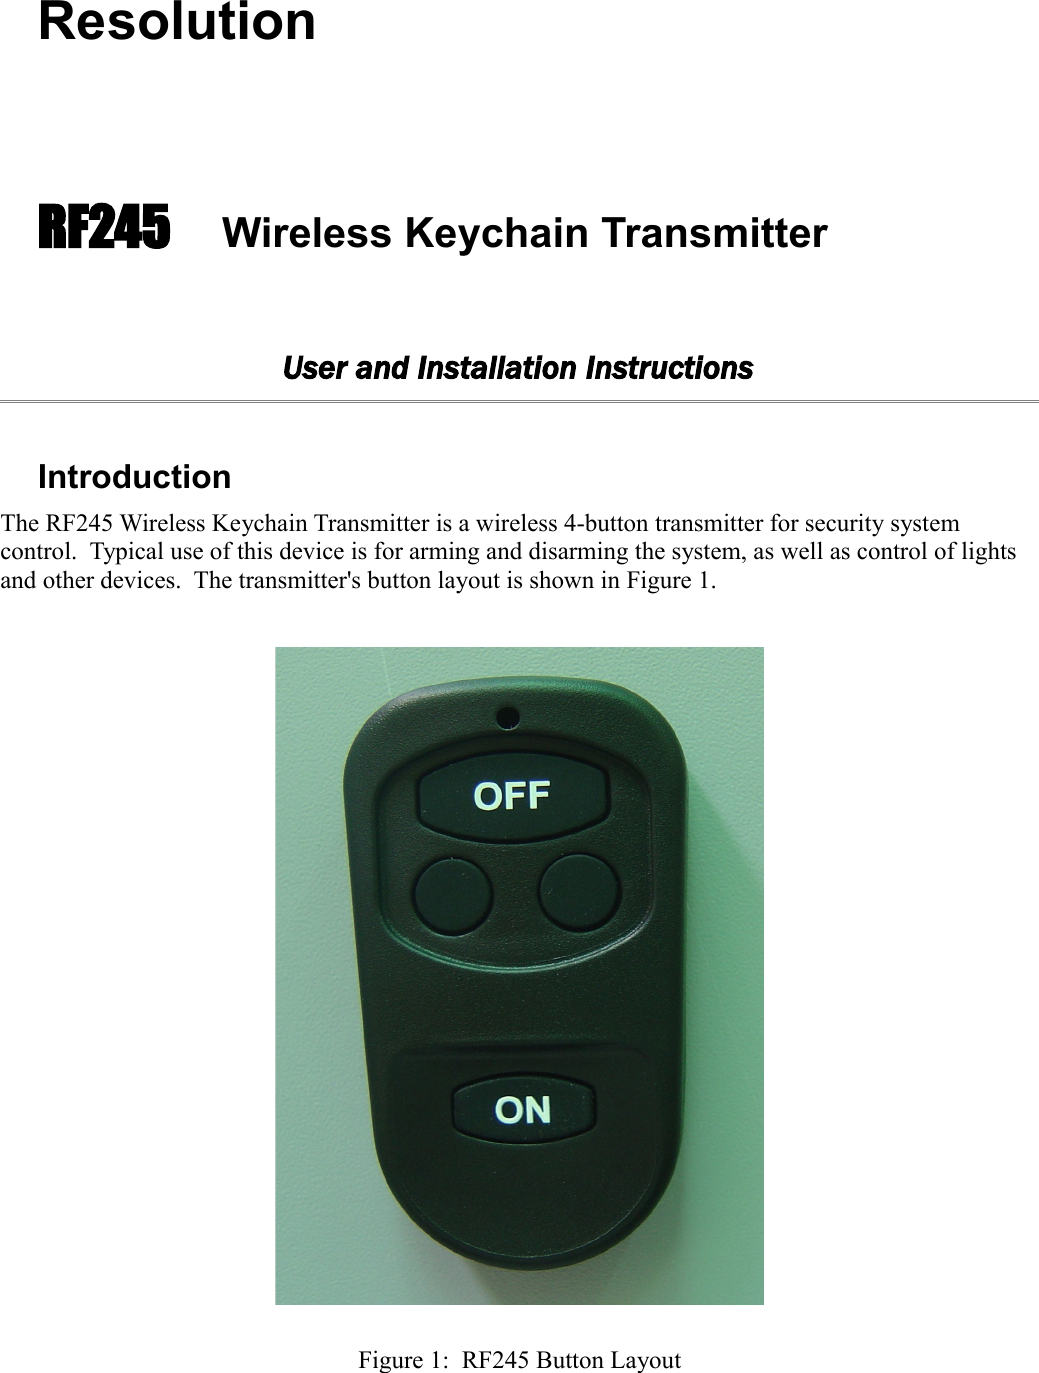 ResolutionRF245 Wireless Keychain TransmitterUser and Installation InstructionsIntroductionThe RF245 Wireless Keychain Transmitter is a wireless 4-button transmitter for security system control.  Typical use of this device is for arming and disarming the system, as well as control of lights and other devices.  The transmitter&apos;s button layout is shown in Figure 1.Figure 1:  RF245 Button Layout